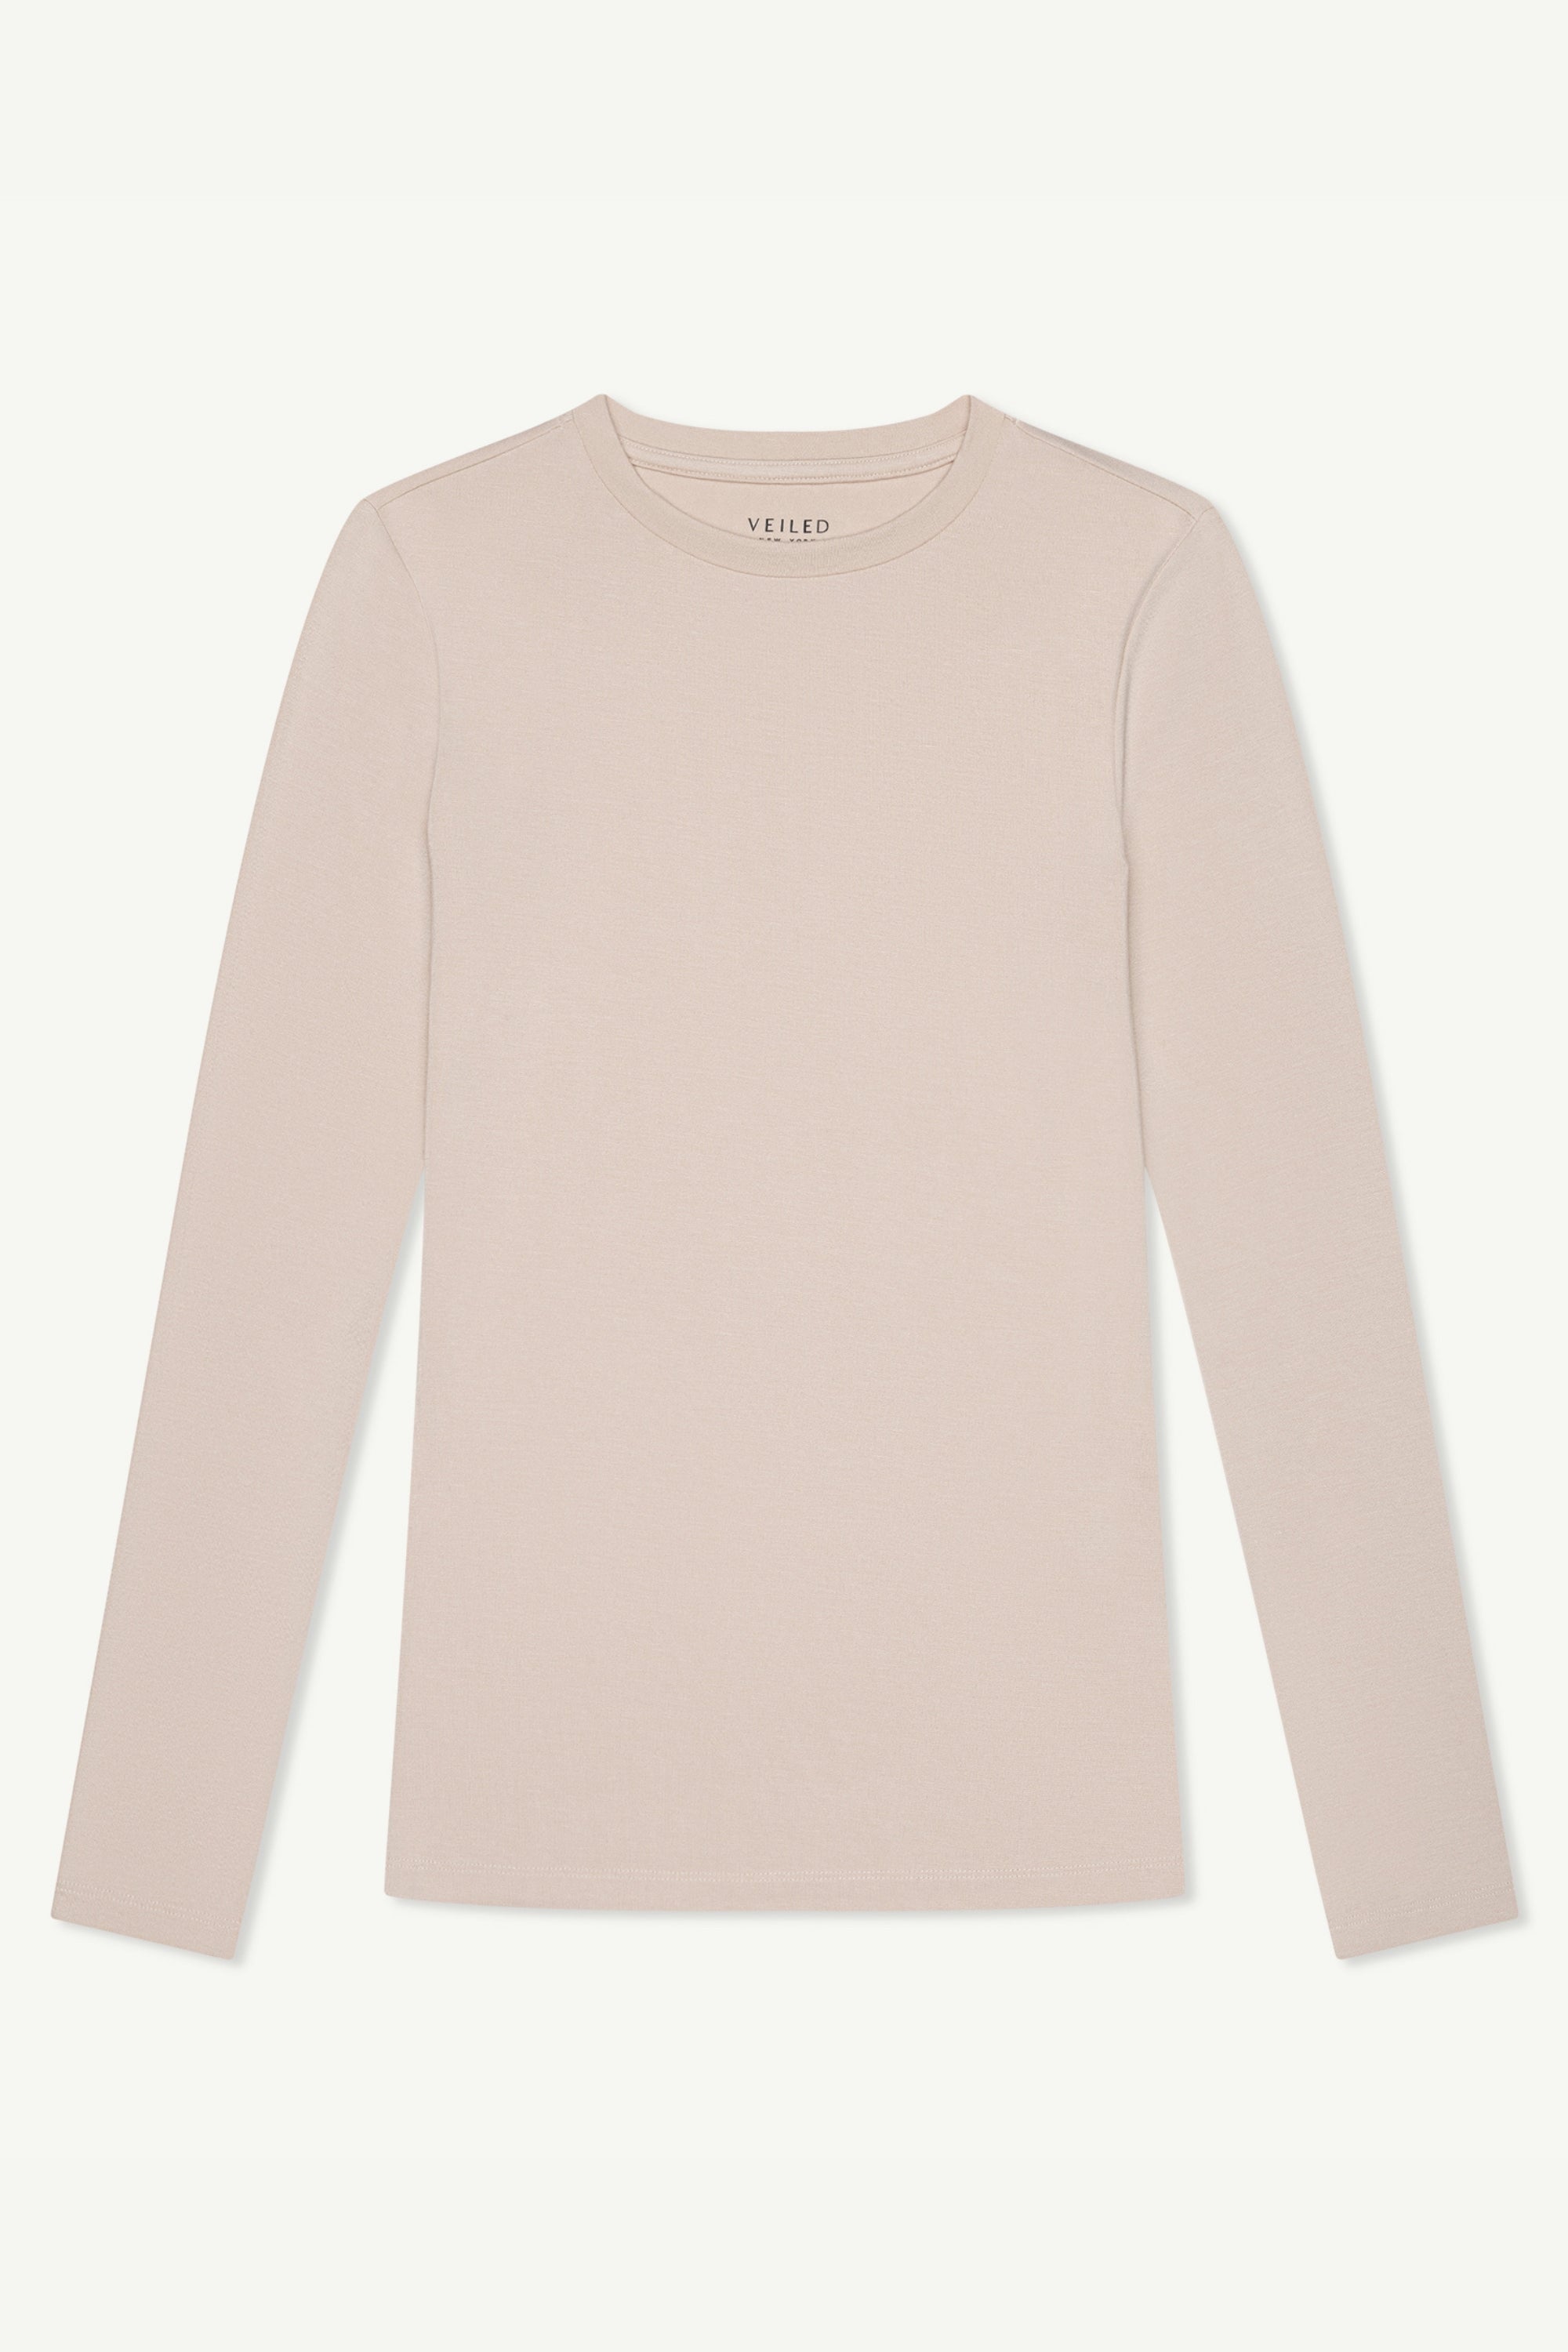 Essential Crew Neck Bamboo Jersey Top - Stone Clothing Veiled 